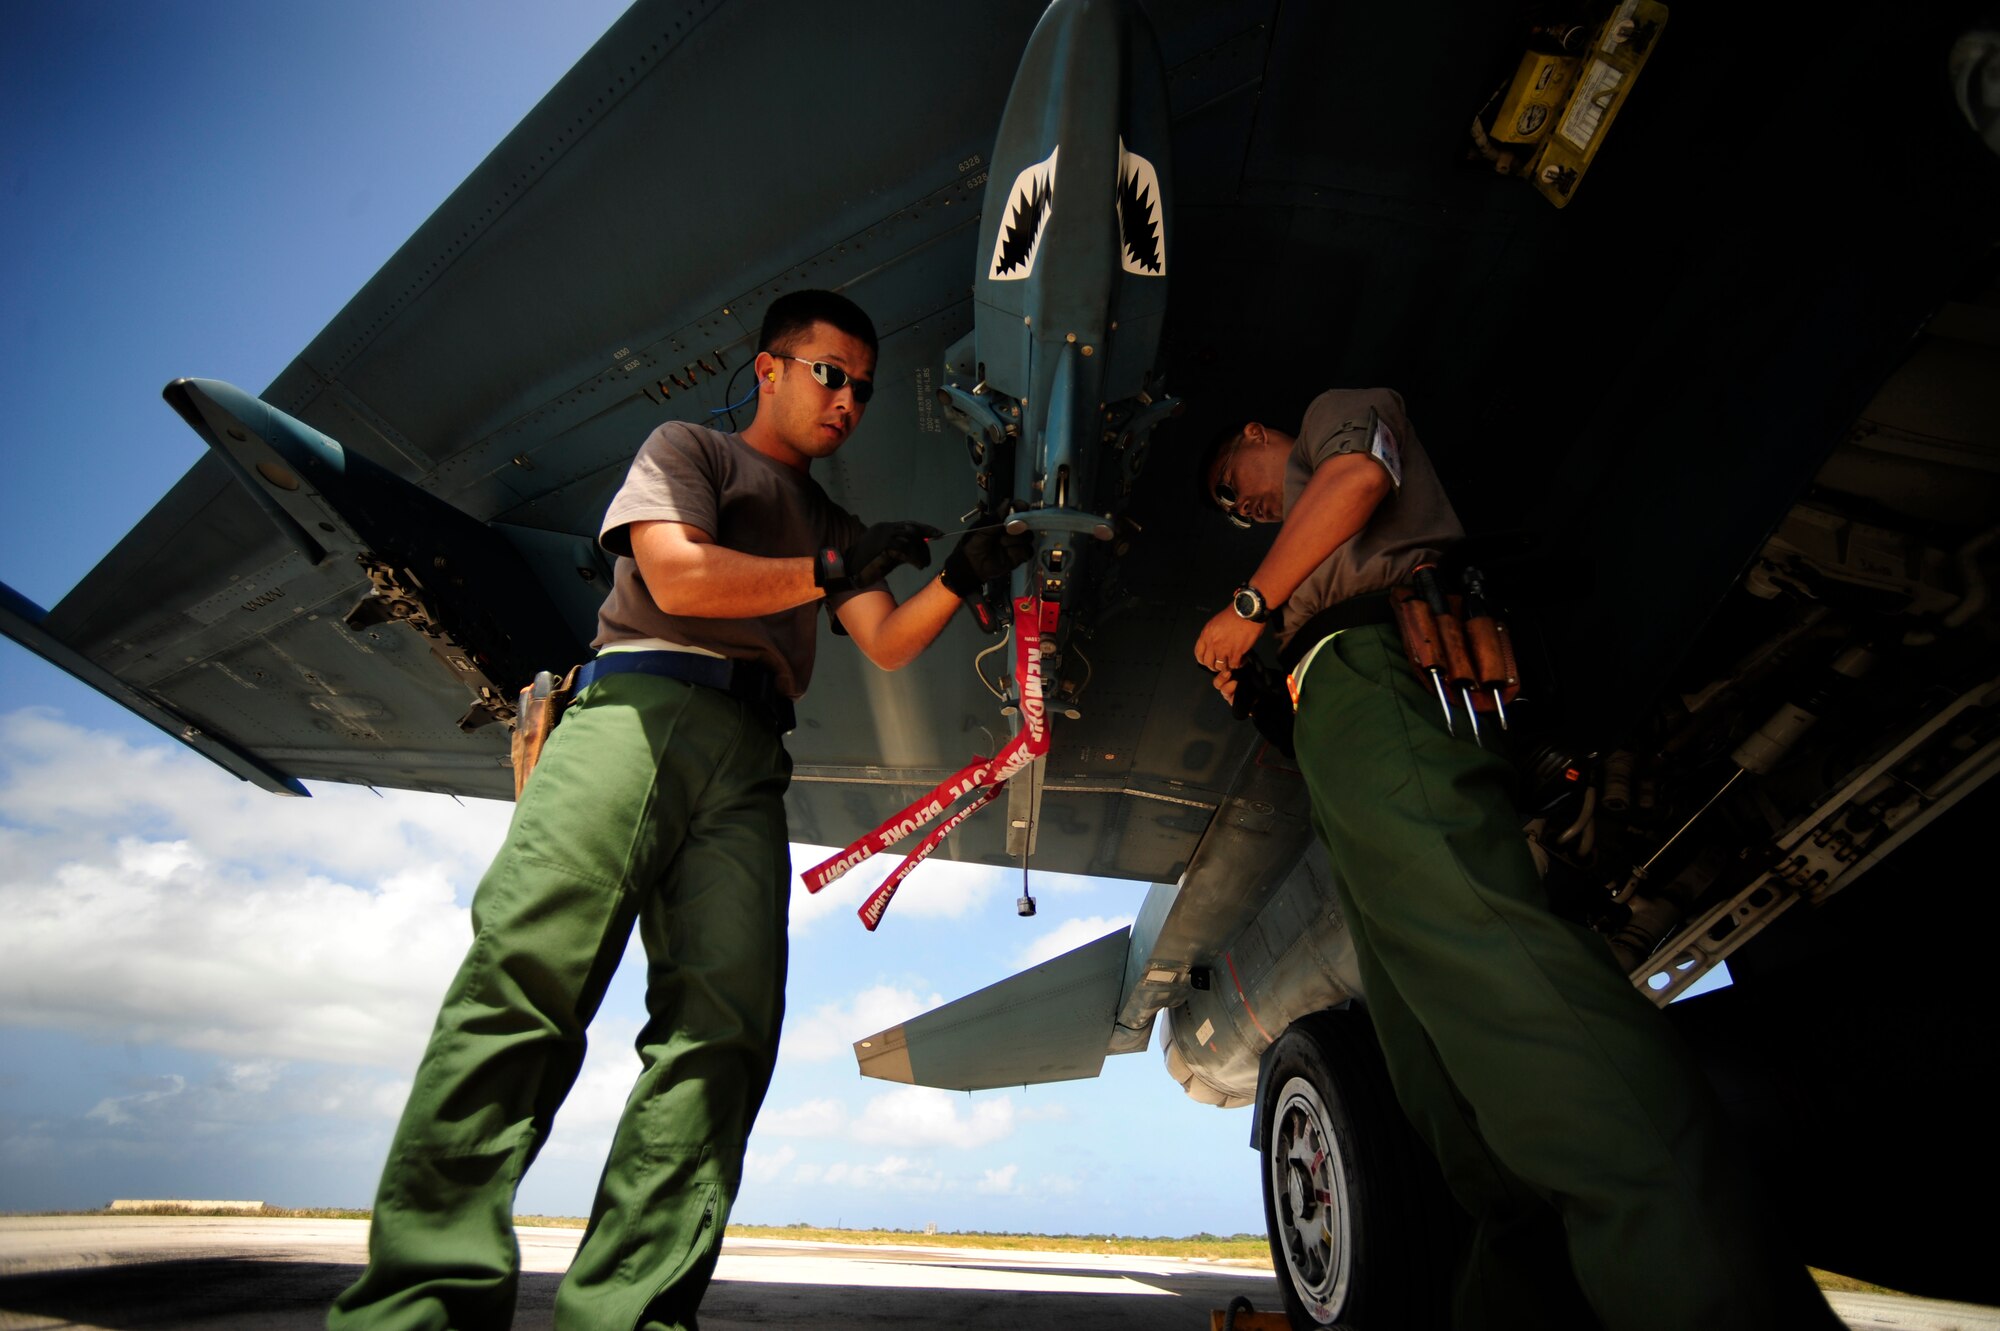 Japanese maintenance crew members of the 8th Combat Wing, 6th TF Squadron, Tsuiki AB, Japan, prepare their F2 for ammunitions during Cope North on Andersen Air Force Base, Guam on Feb. 9, 2010. The United States Air Force and the Japanese Air Self-Defense Force conduct Cope North annually to increase combat readiness and interoperability, concentrating on coordination and evaluation of air tactics, techniques, and procedures. The ability for both nations to work together increases their preparedness to support real-world contingencies.
(USAF photo by Staff Sgt. Andy M. Kin)
